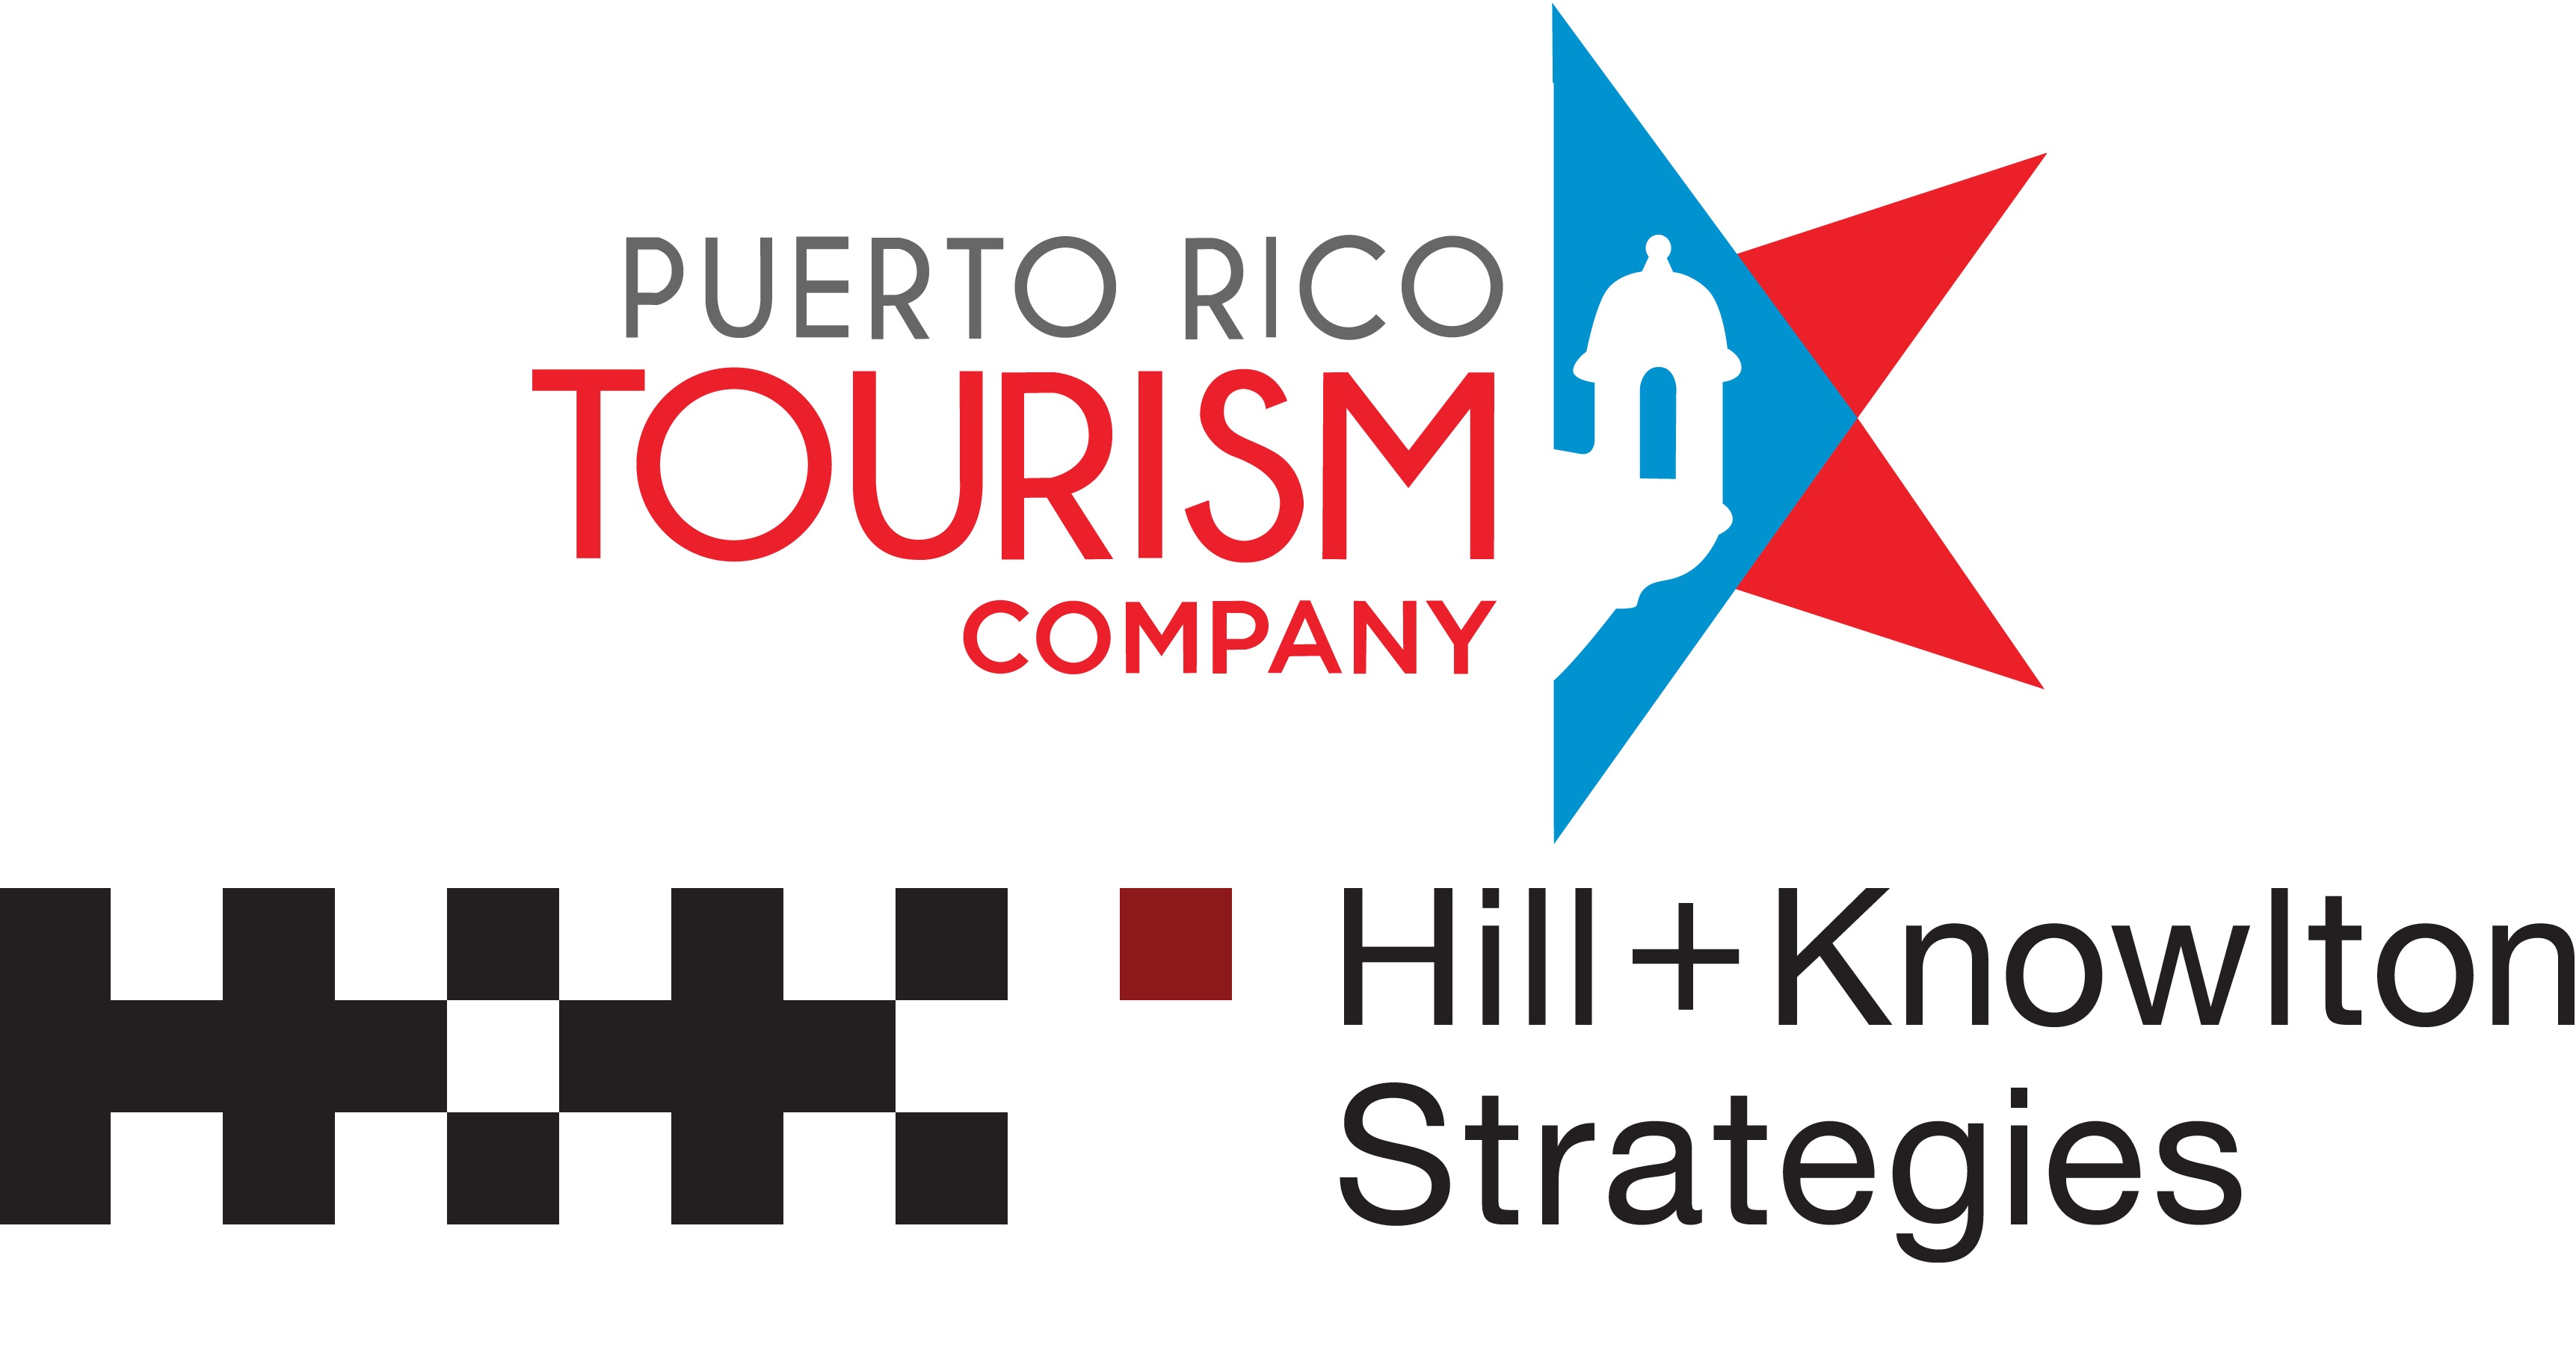 Establishing Puerto Rico as a Global Destination - Logo - https://s41078.pcdn.co/wp-content/uploads/2018/11/Traditional-Campaign.jpg